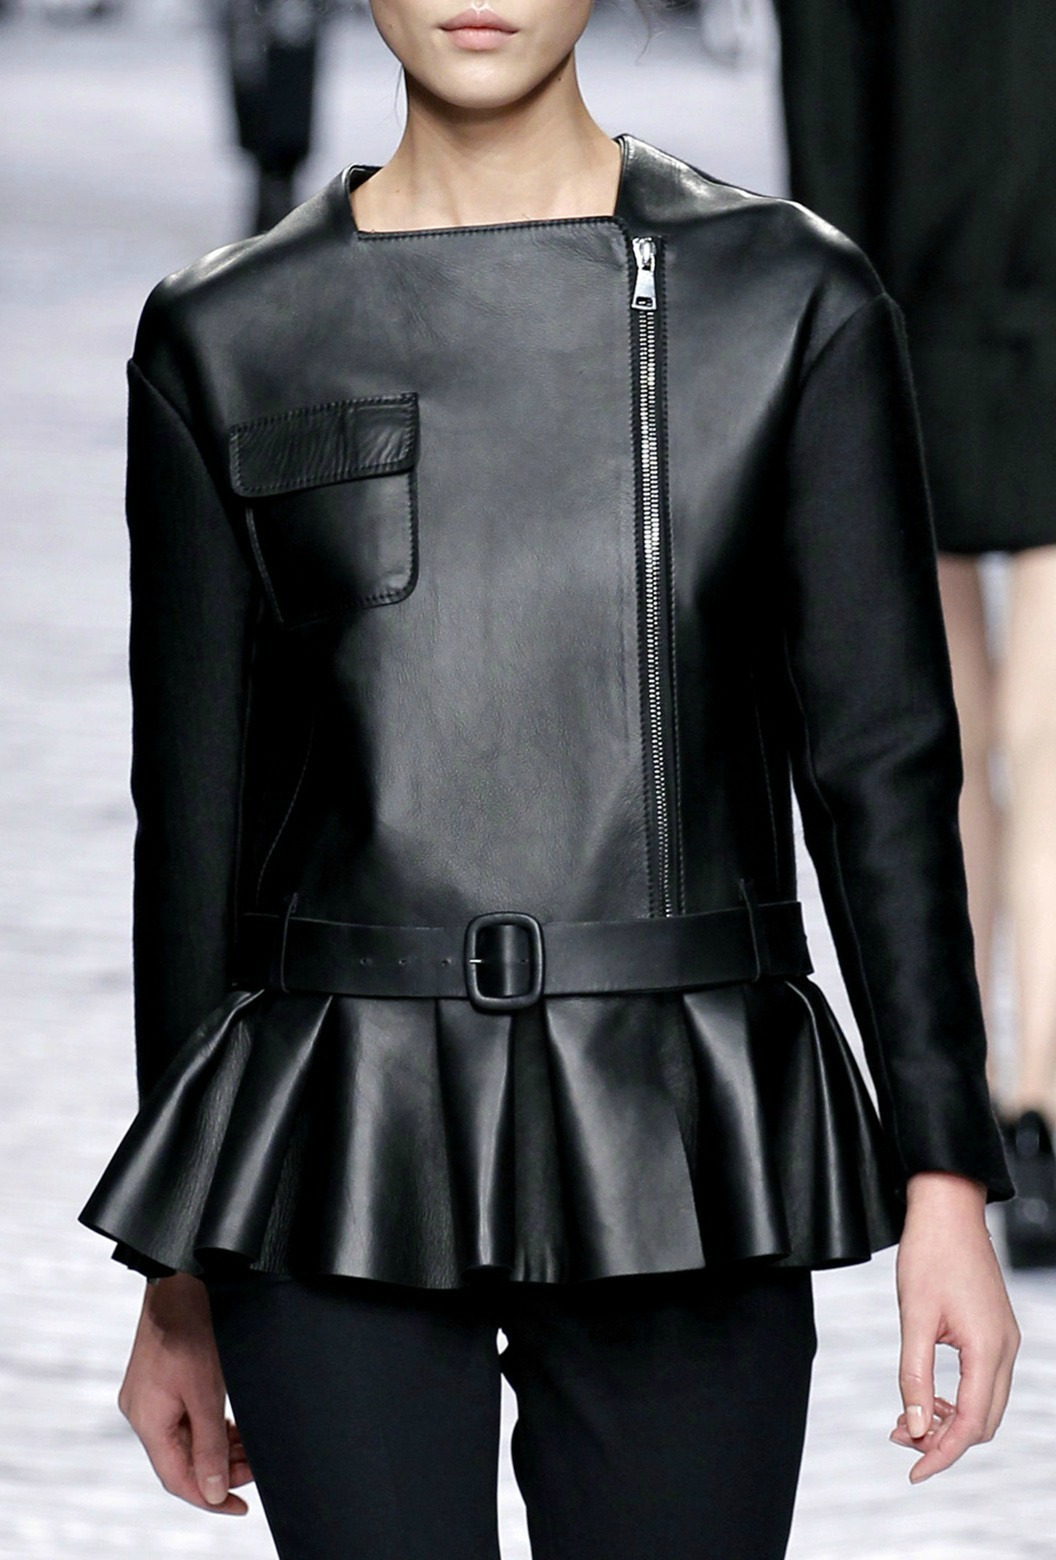 This Mad Beautiful Life - turnyourfacetothesun: Viktor and Rolf - Fall...